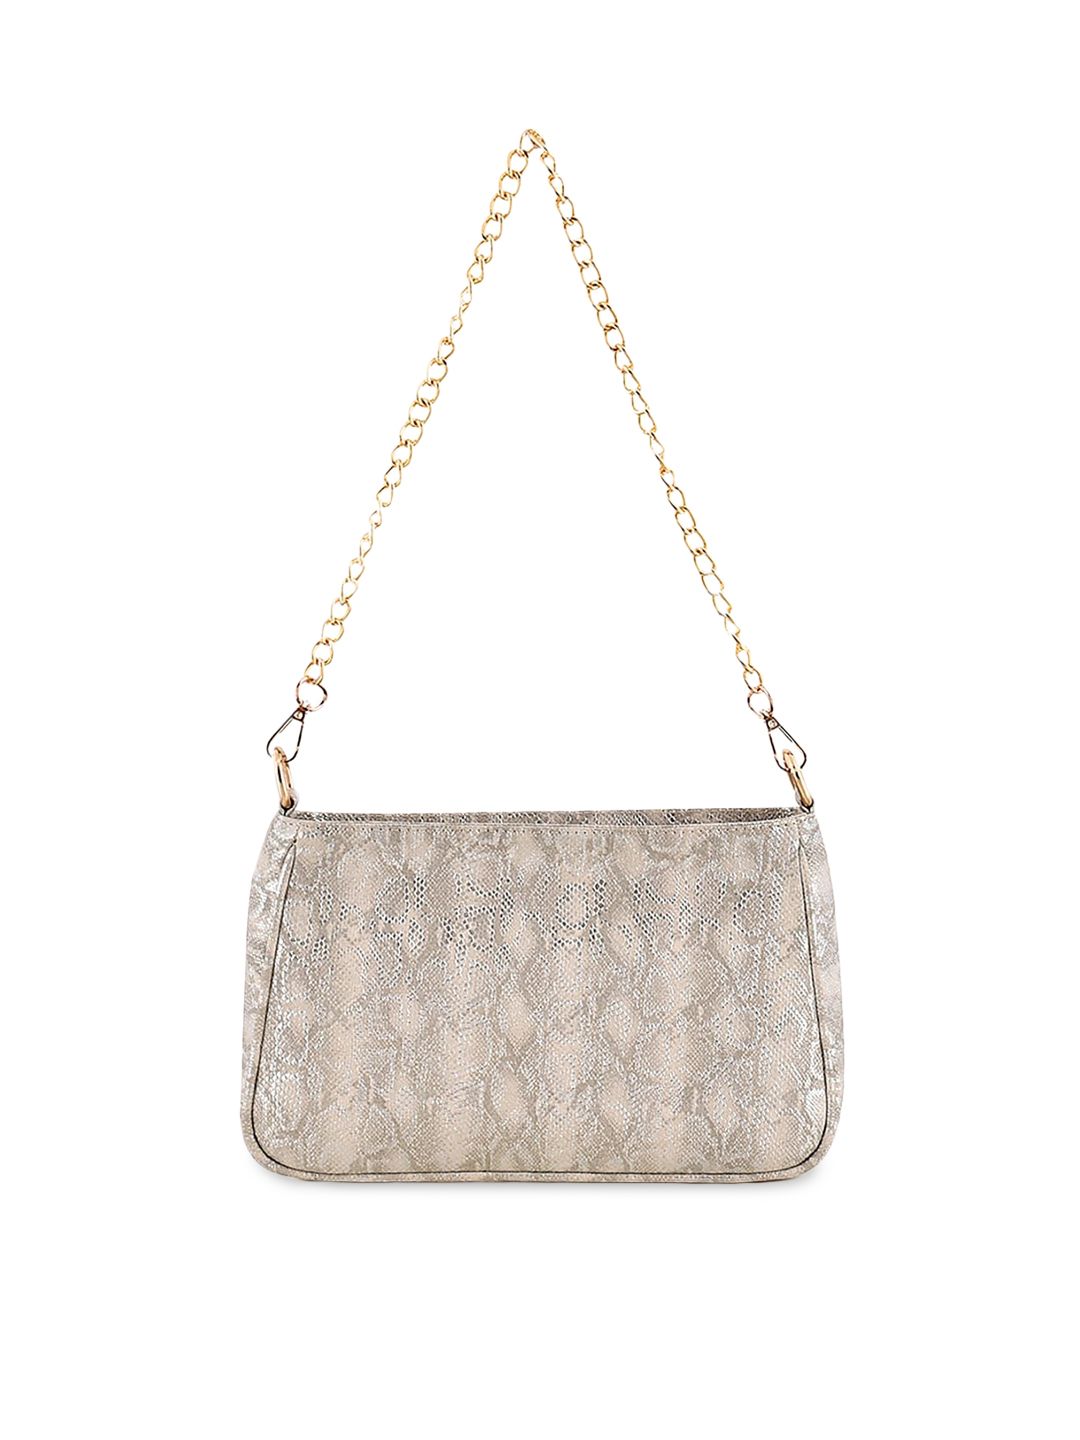 Lychee bags Peach-Coloured & Silver-Toned Printed Sling Bag Price in India